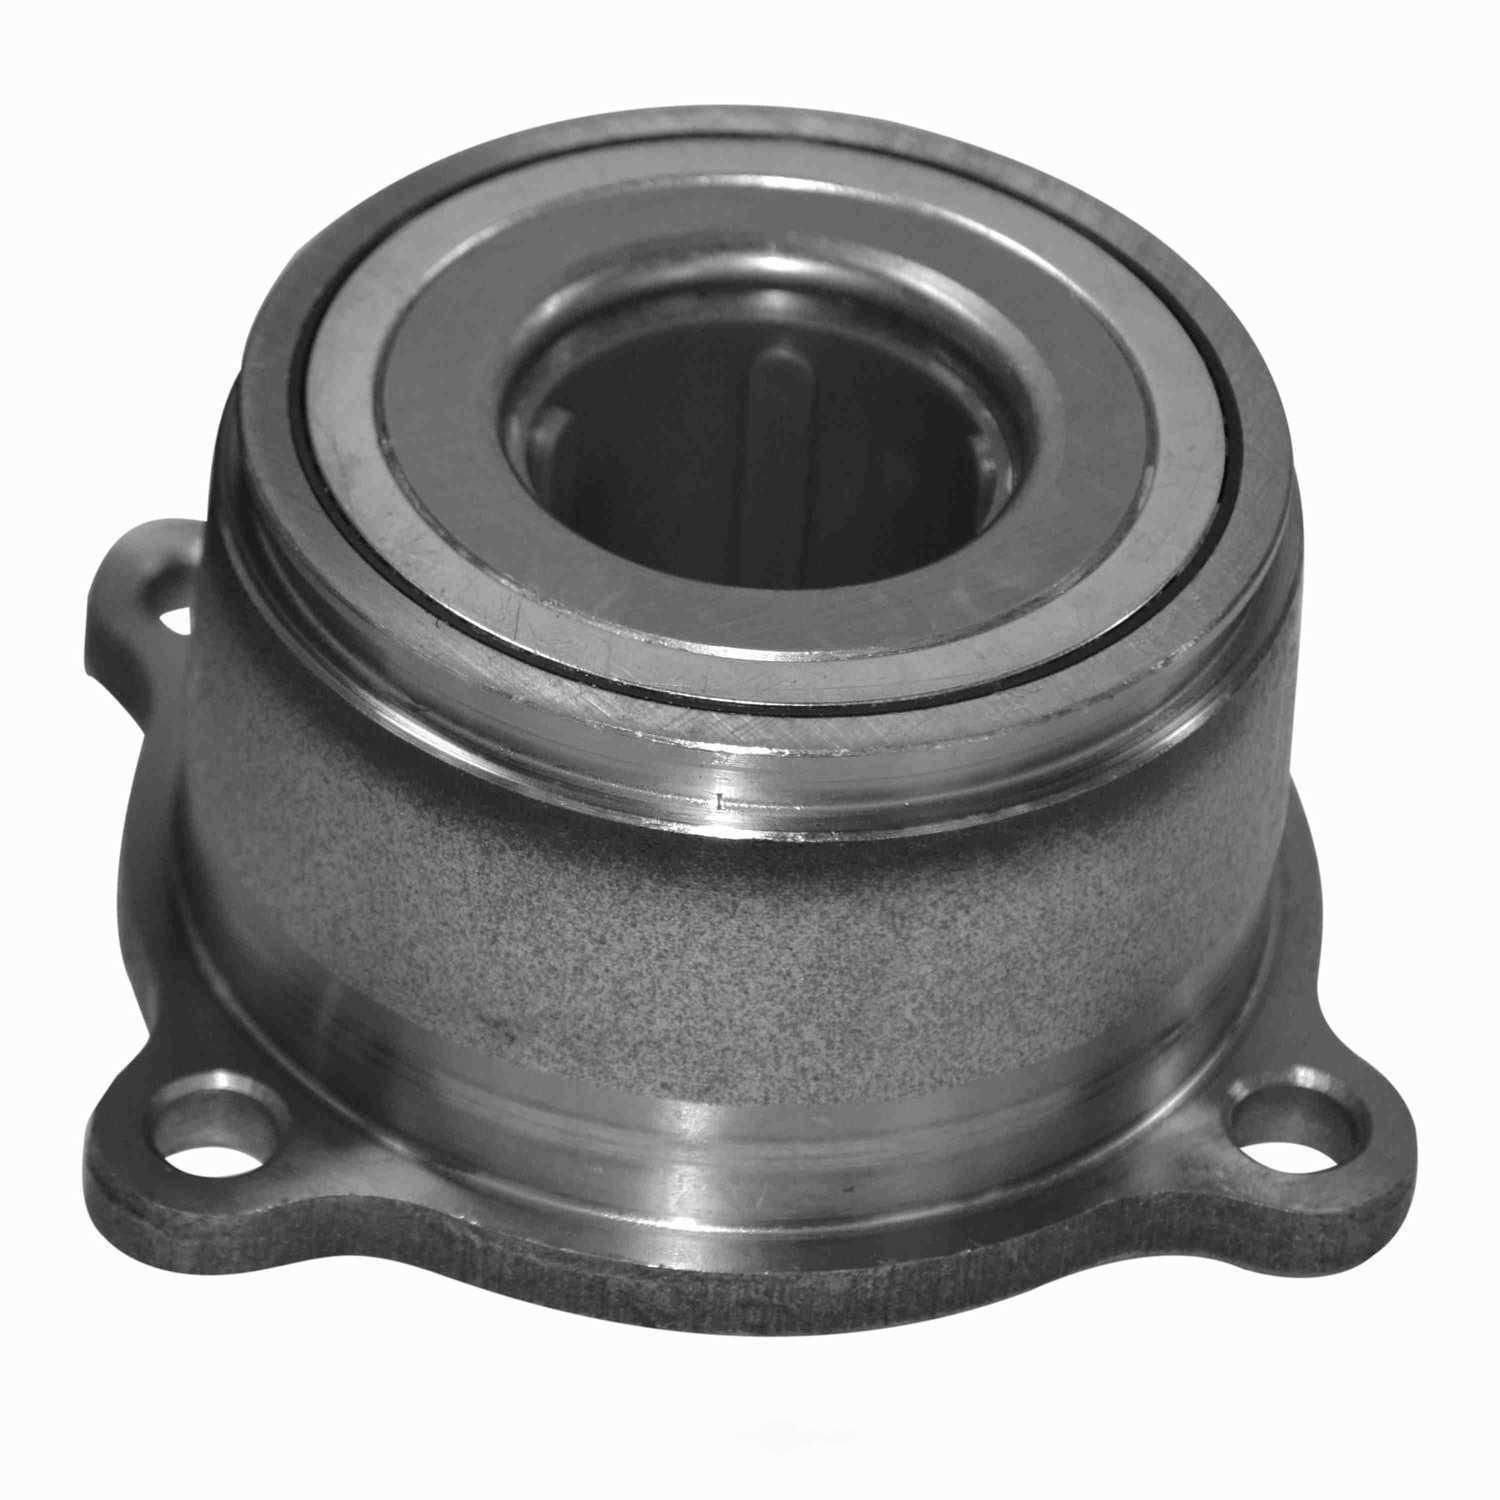 GSP NORTH AMERICA INC. - GSP New Wheel Bearing and Hub Assembly (Rear) - AD8 532011